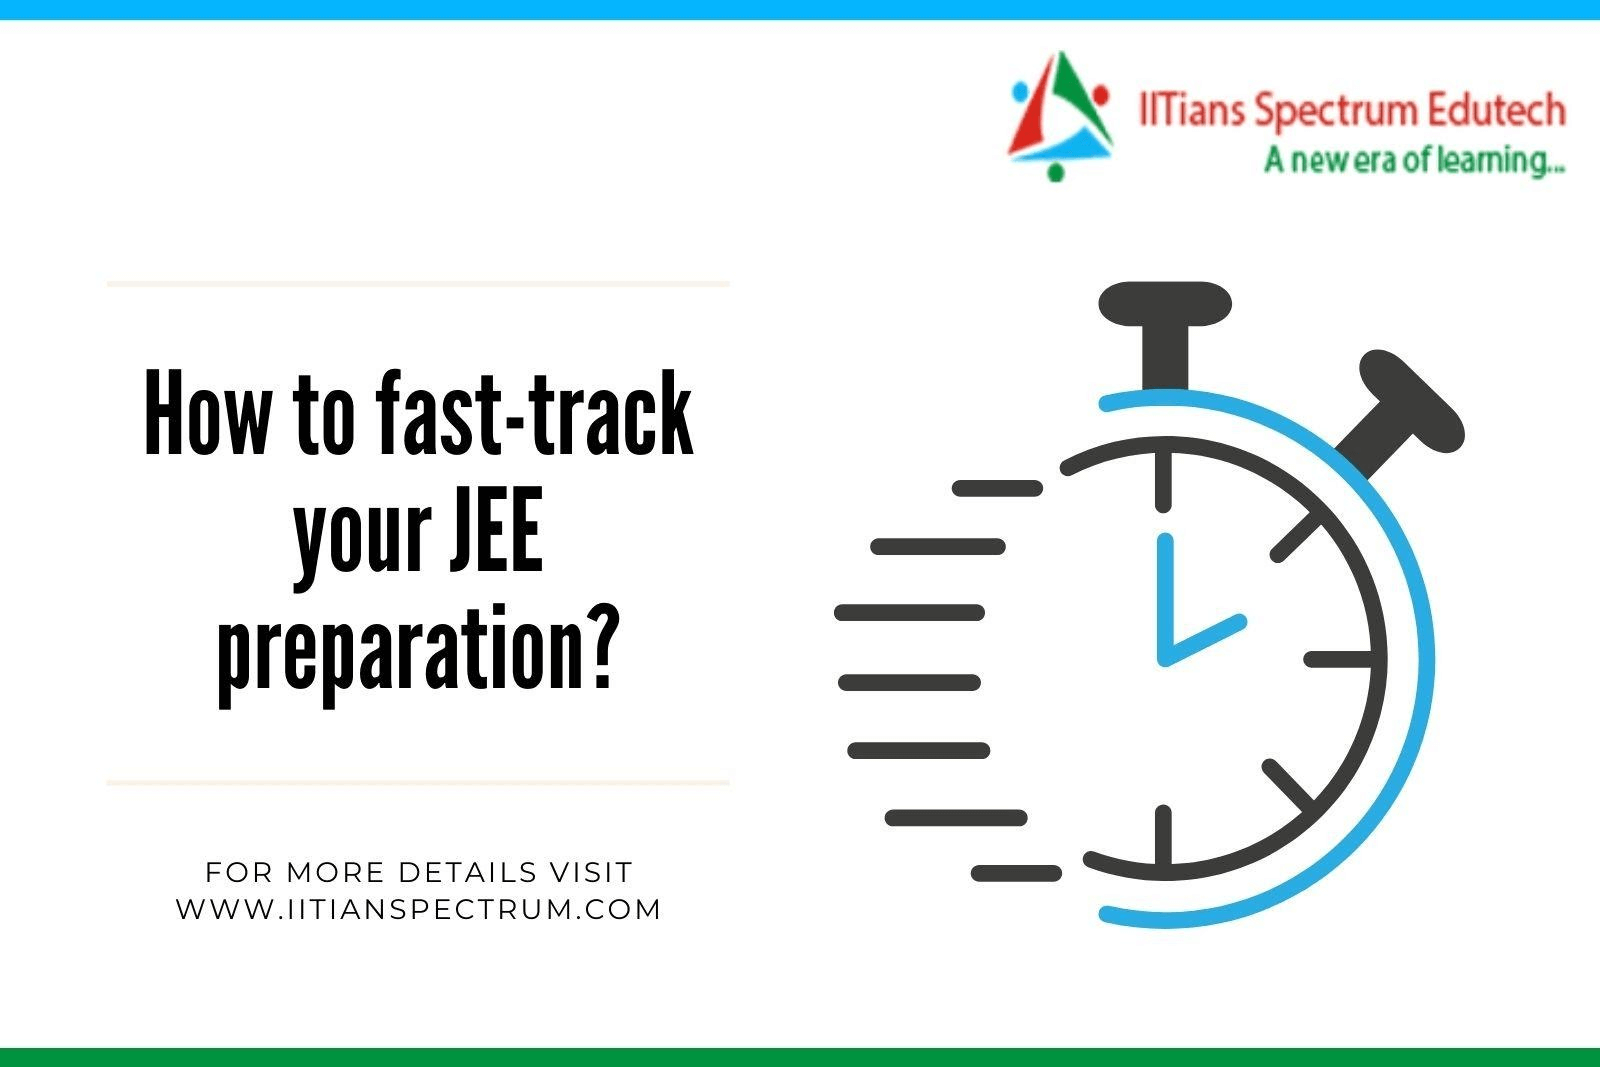 How to fast-track your JEE preparation (Expert Guide)?